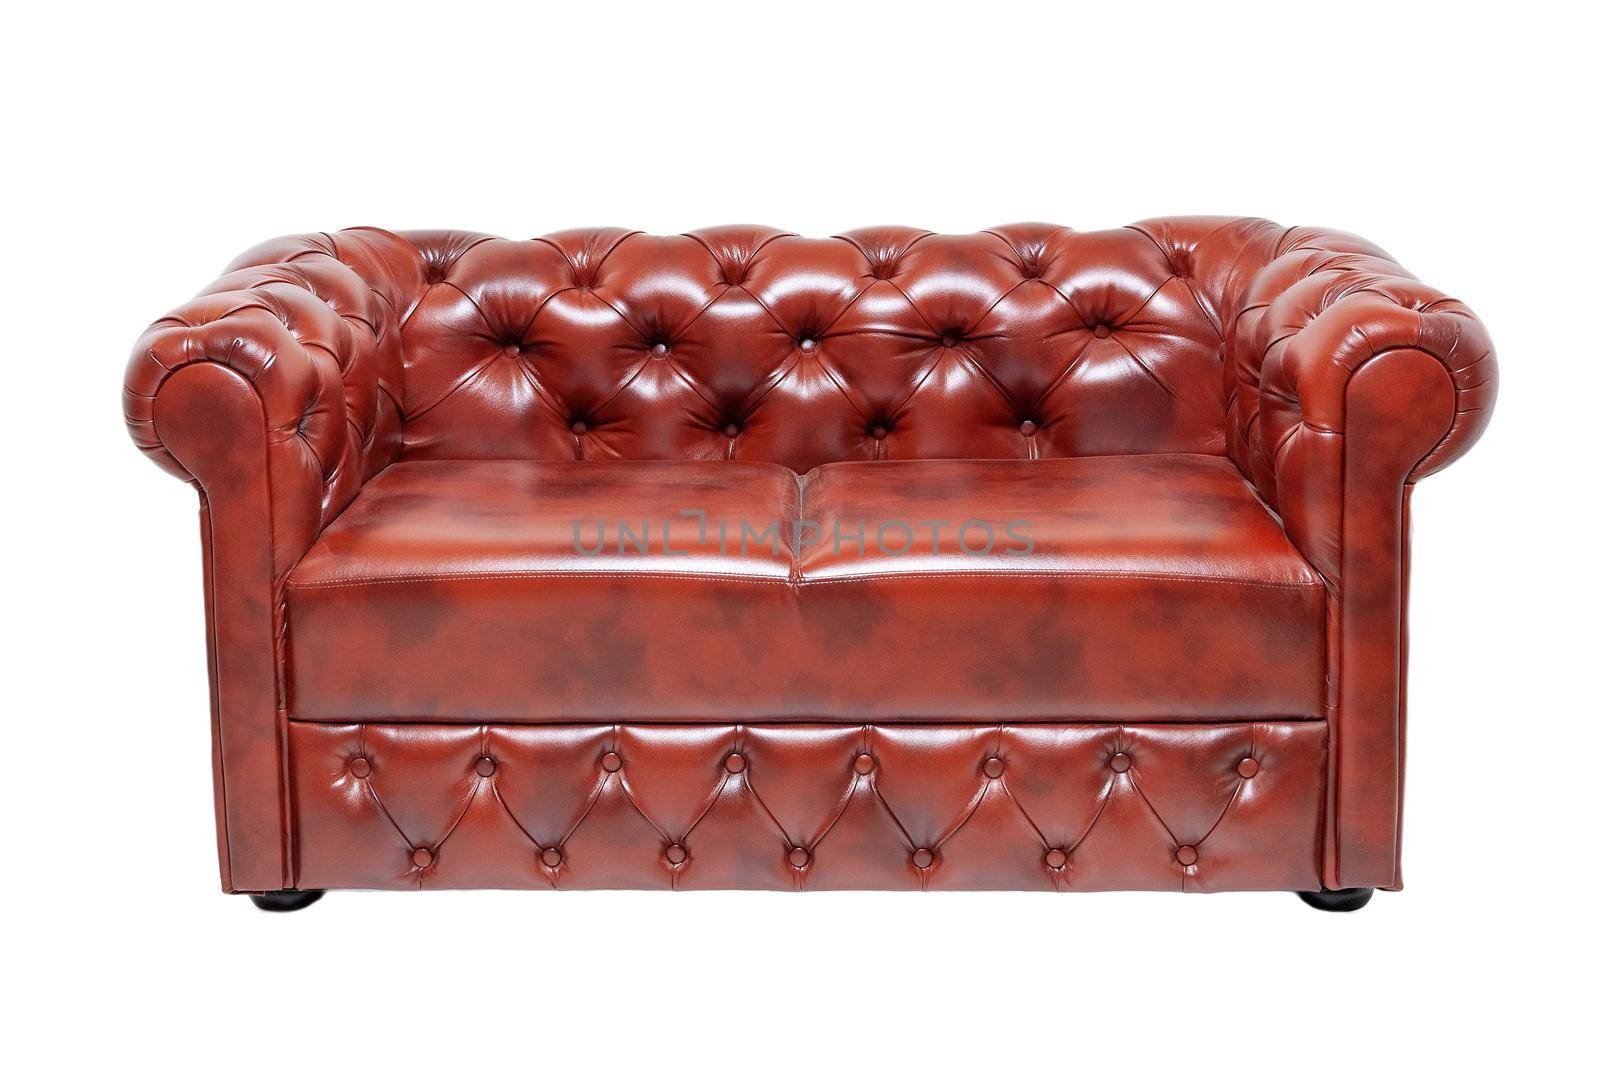 single brown luxurious leather office sofa isolated on white background, front view. antique furniture, old vintage couch, interior, home design